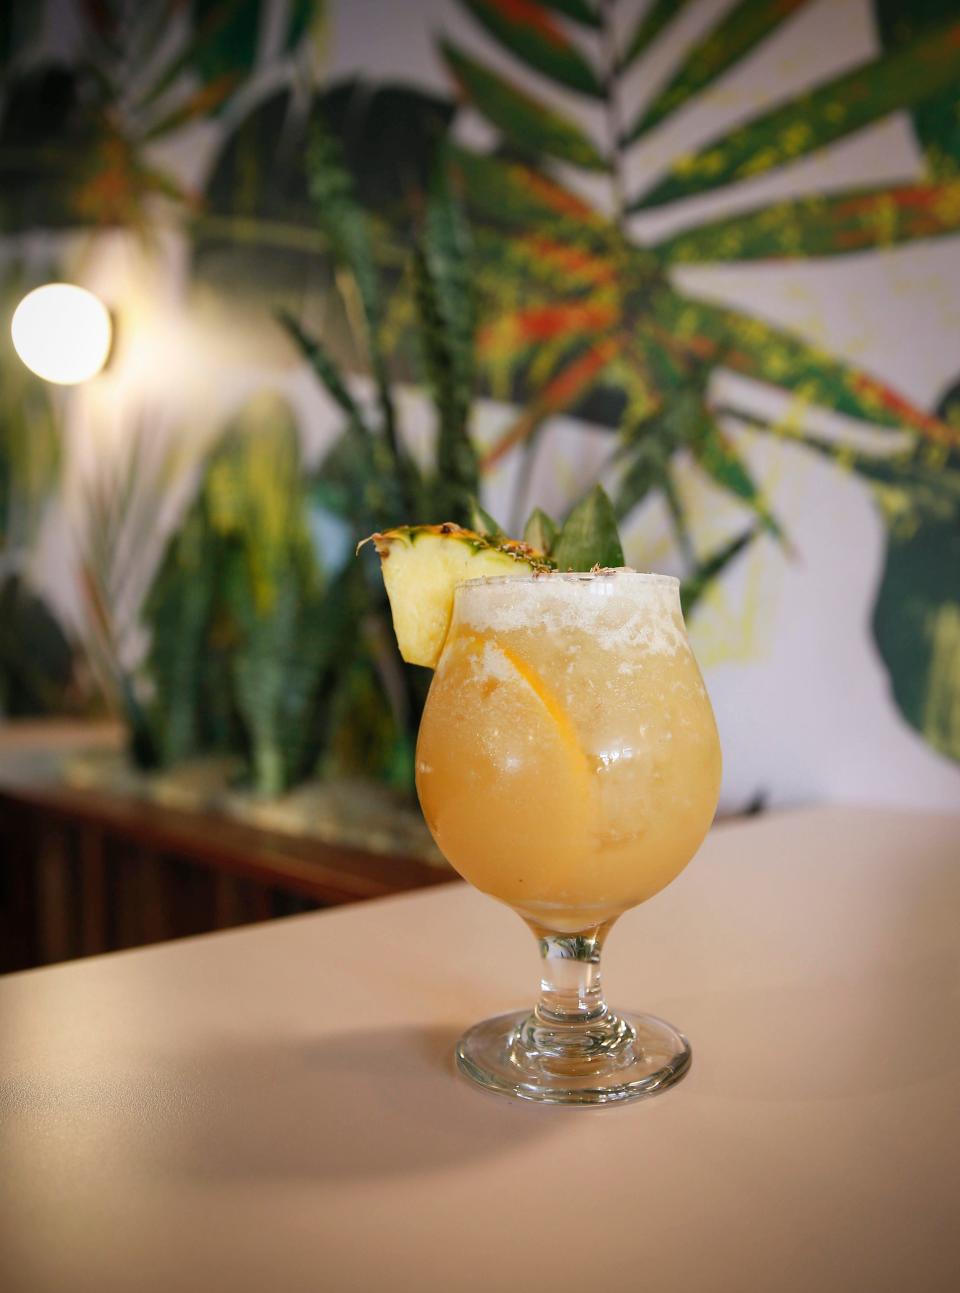 Find the Painkiller at Bellhop, a tiki bar in the East Village.